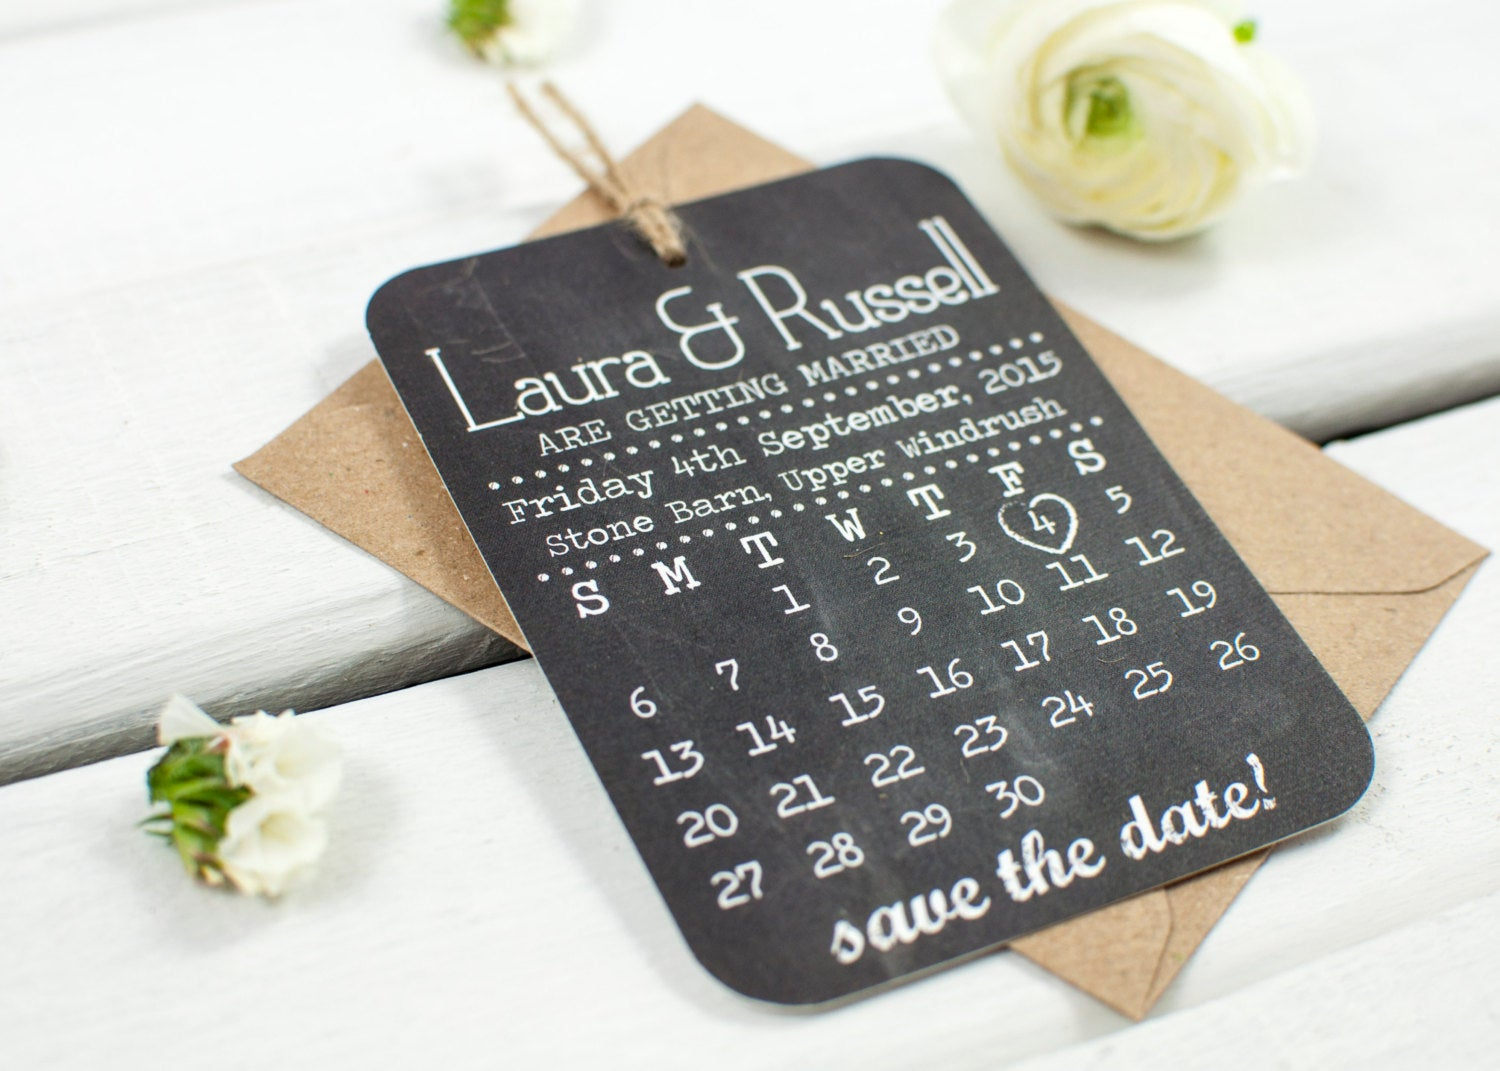 Save The Date  Chalkboard Calendar By Normadorothy On Etsy within Please Save The Date In Your Calendar